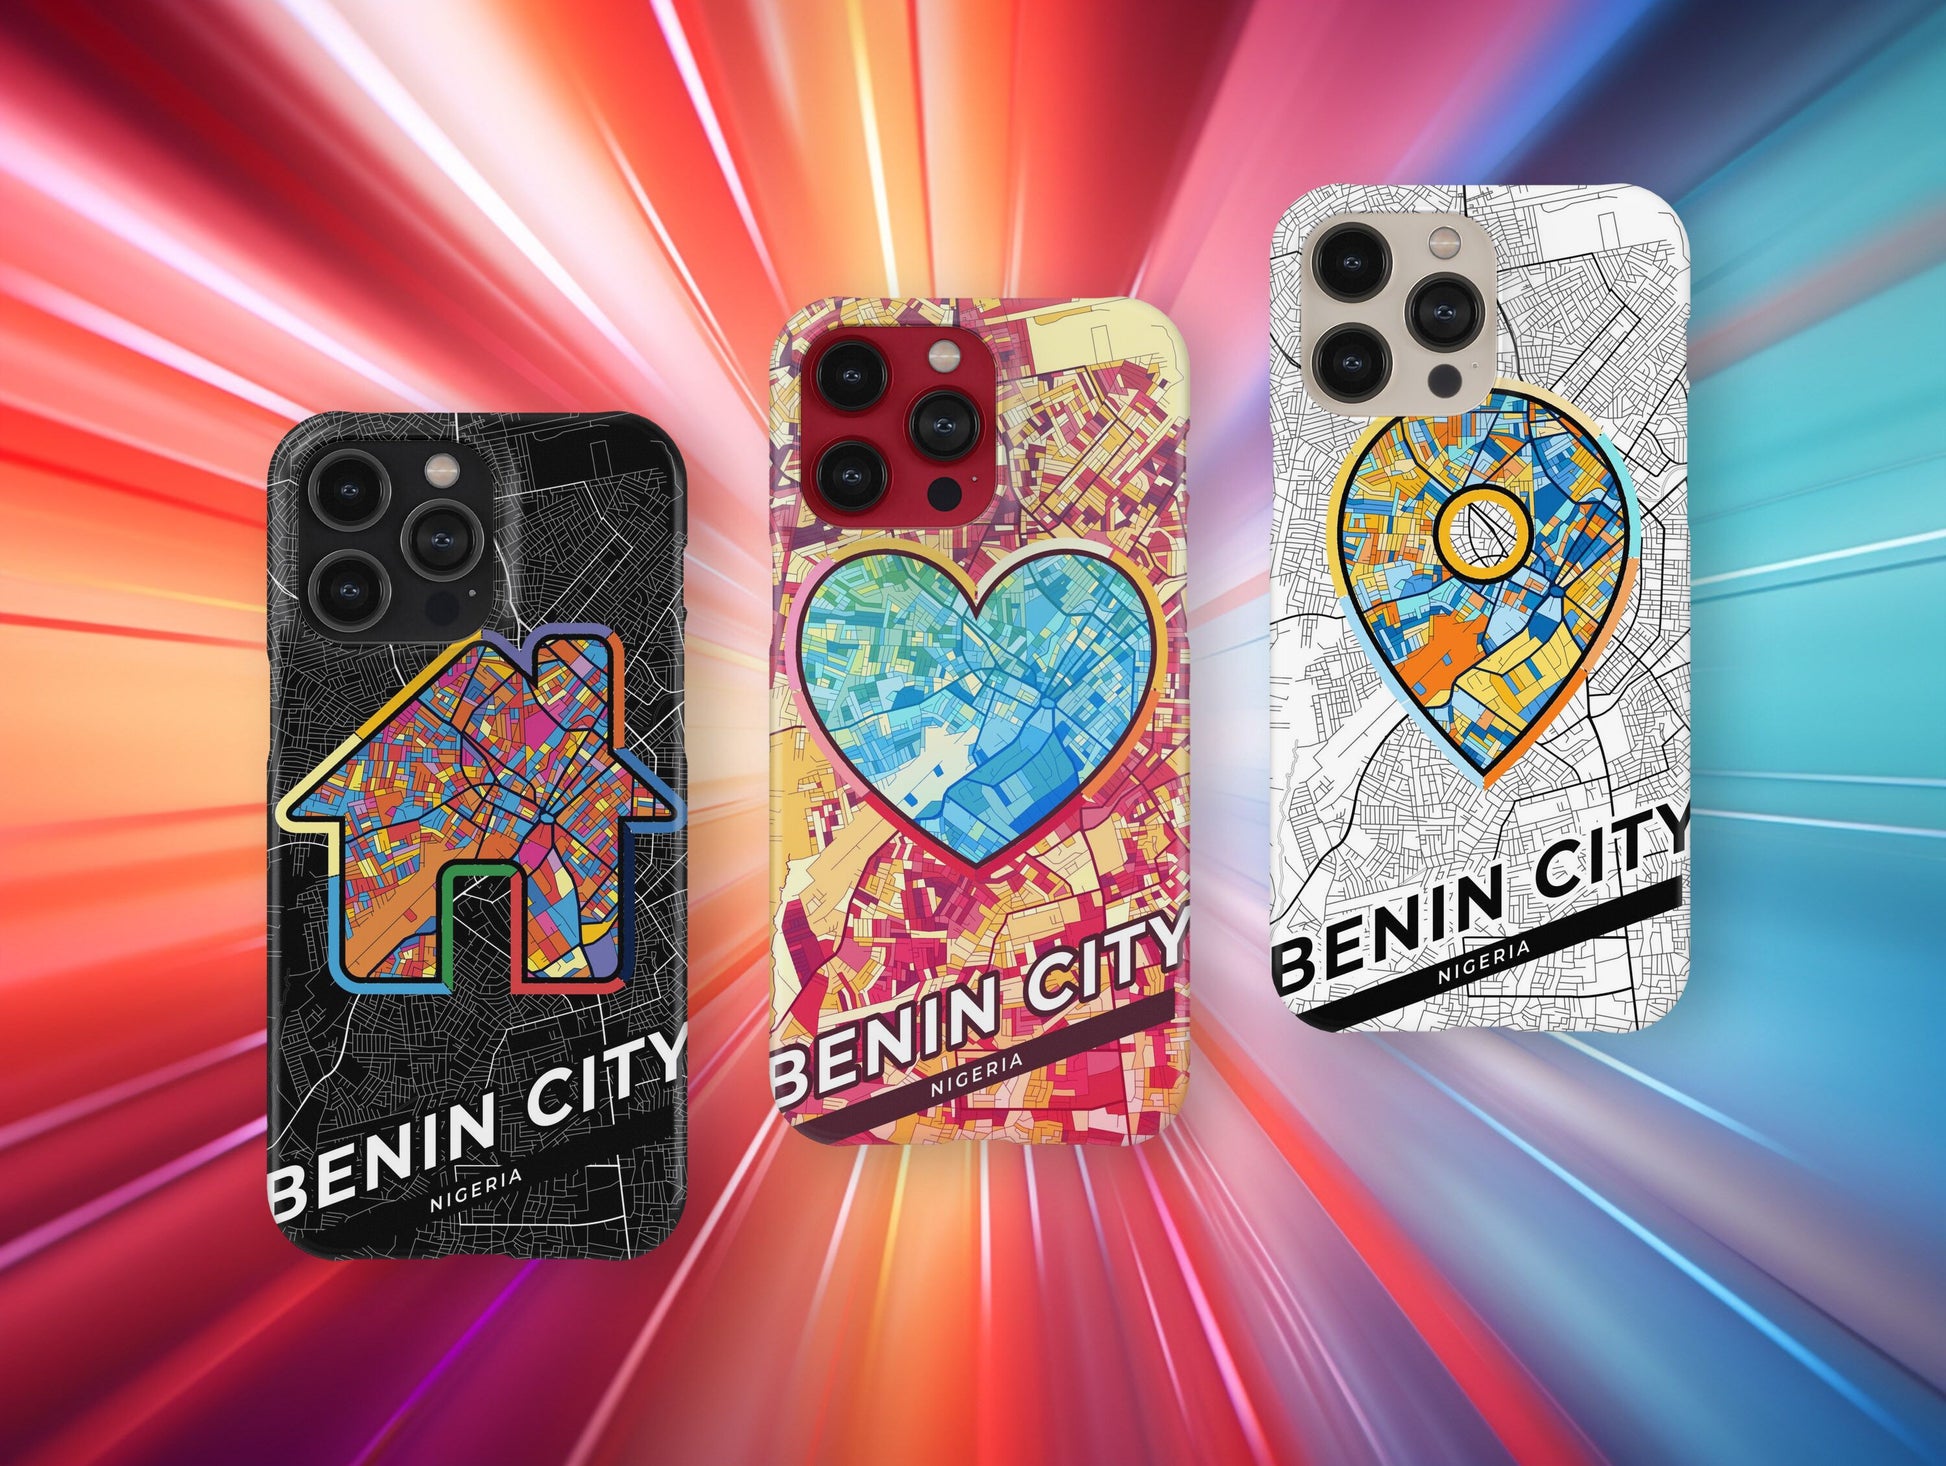 Benin City Nigeria slim phone case with colorful icon. Birthday, wedding or housewarming gift. Couple match cases.